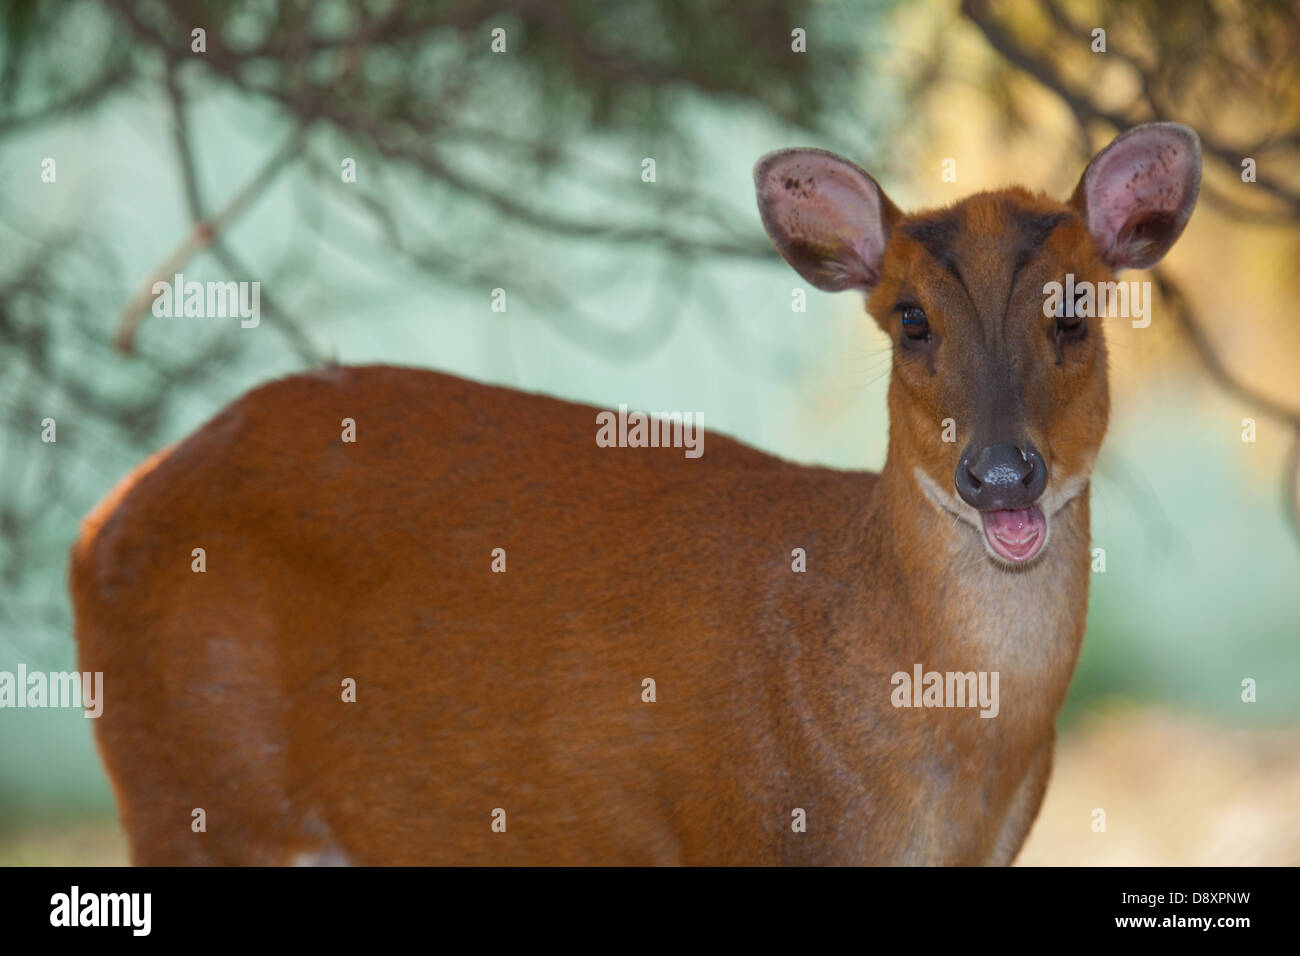 Indian, Common or Red Muntjac Deer (Muntiacus muntjak). Female chewing the cud. Nepal. Stock Photo